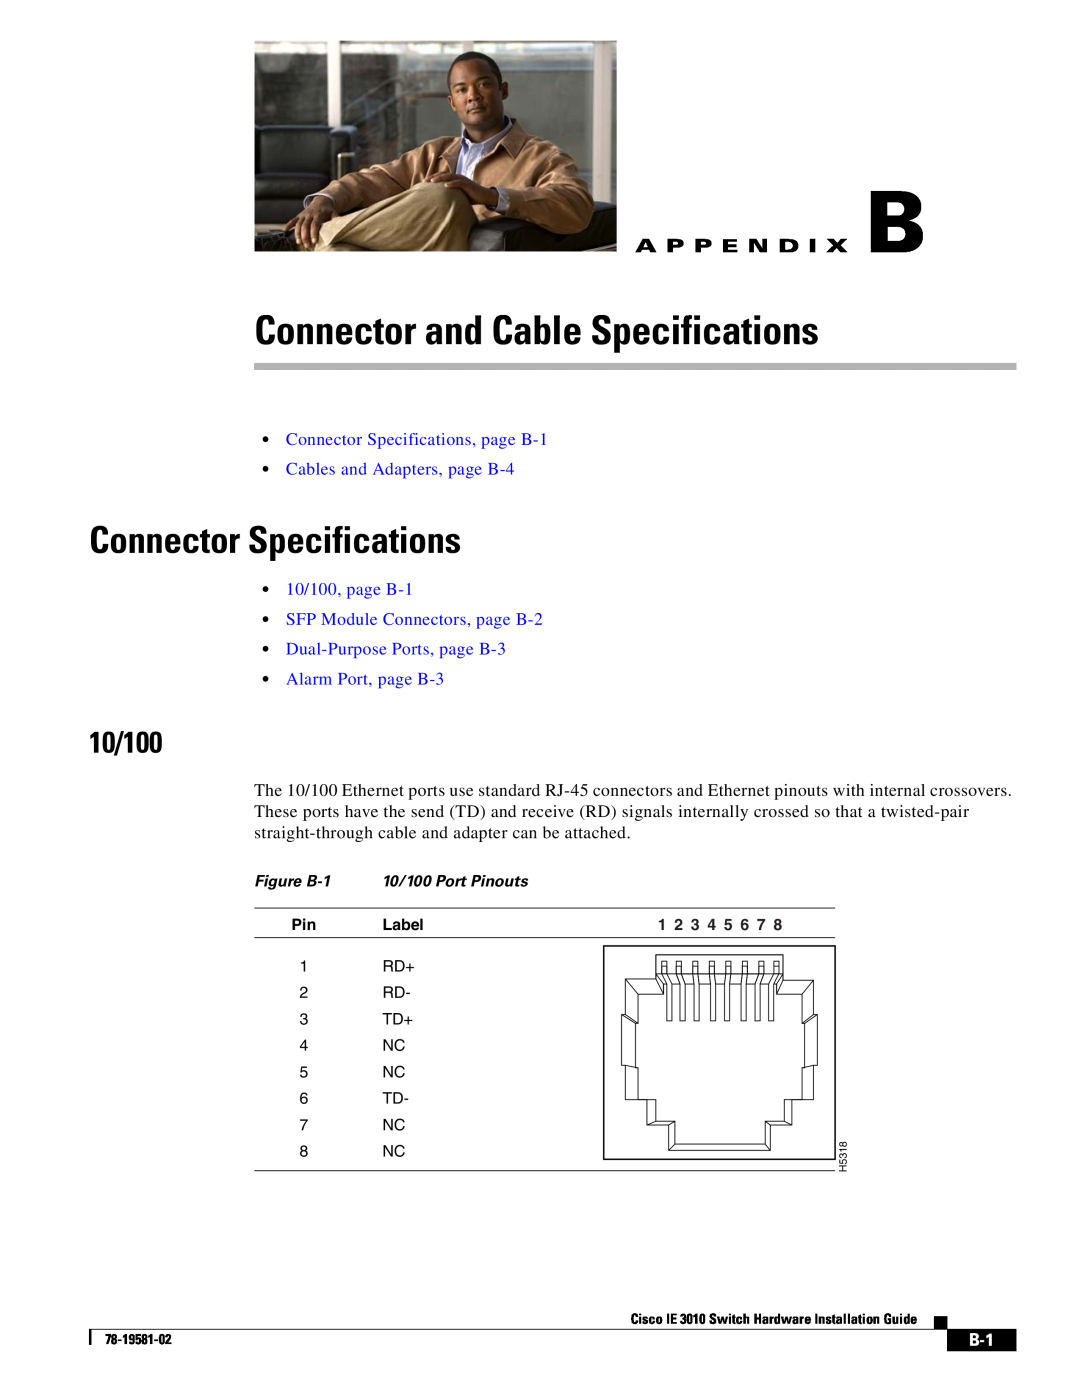 Cisco Systems IE301024TC manual Connector and Cable Specifications, Connector Specifications, 10/100, A P P E N D I X B 